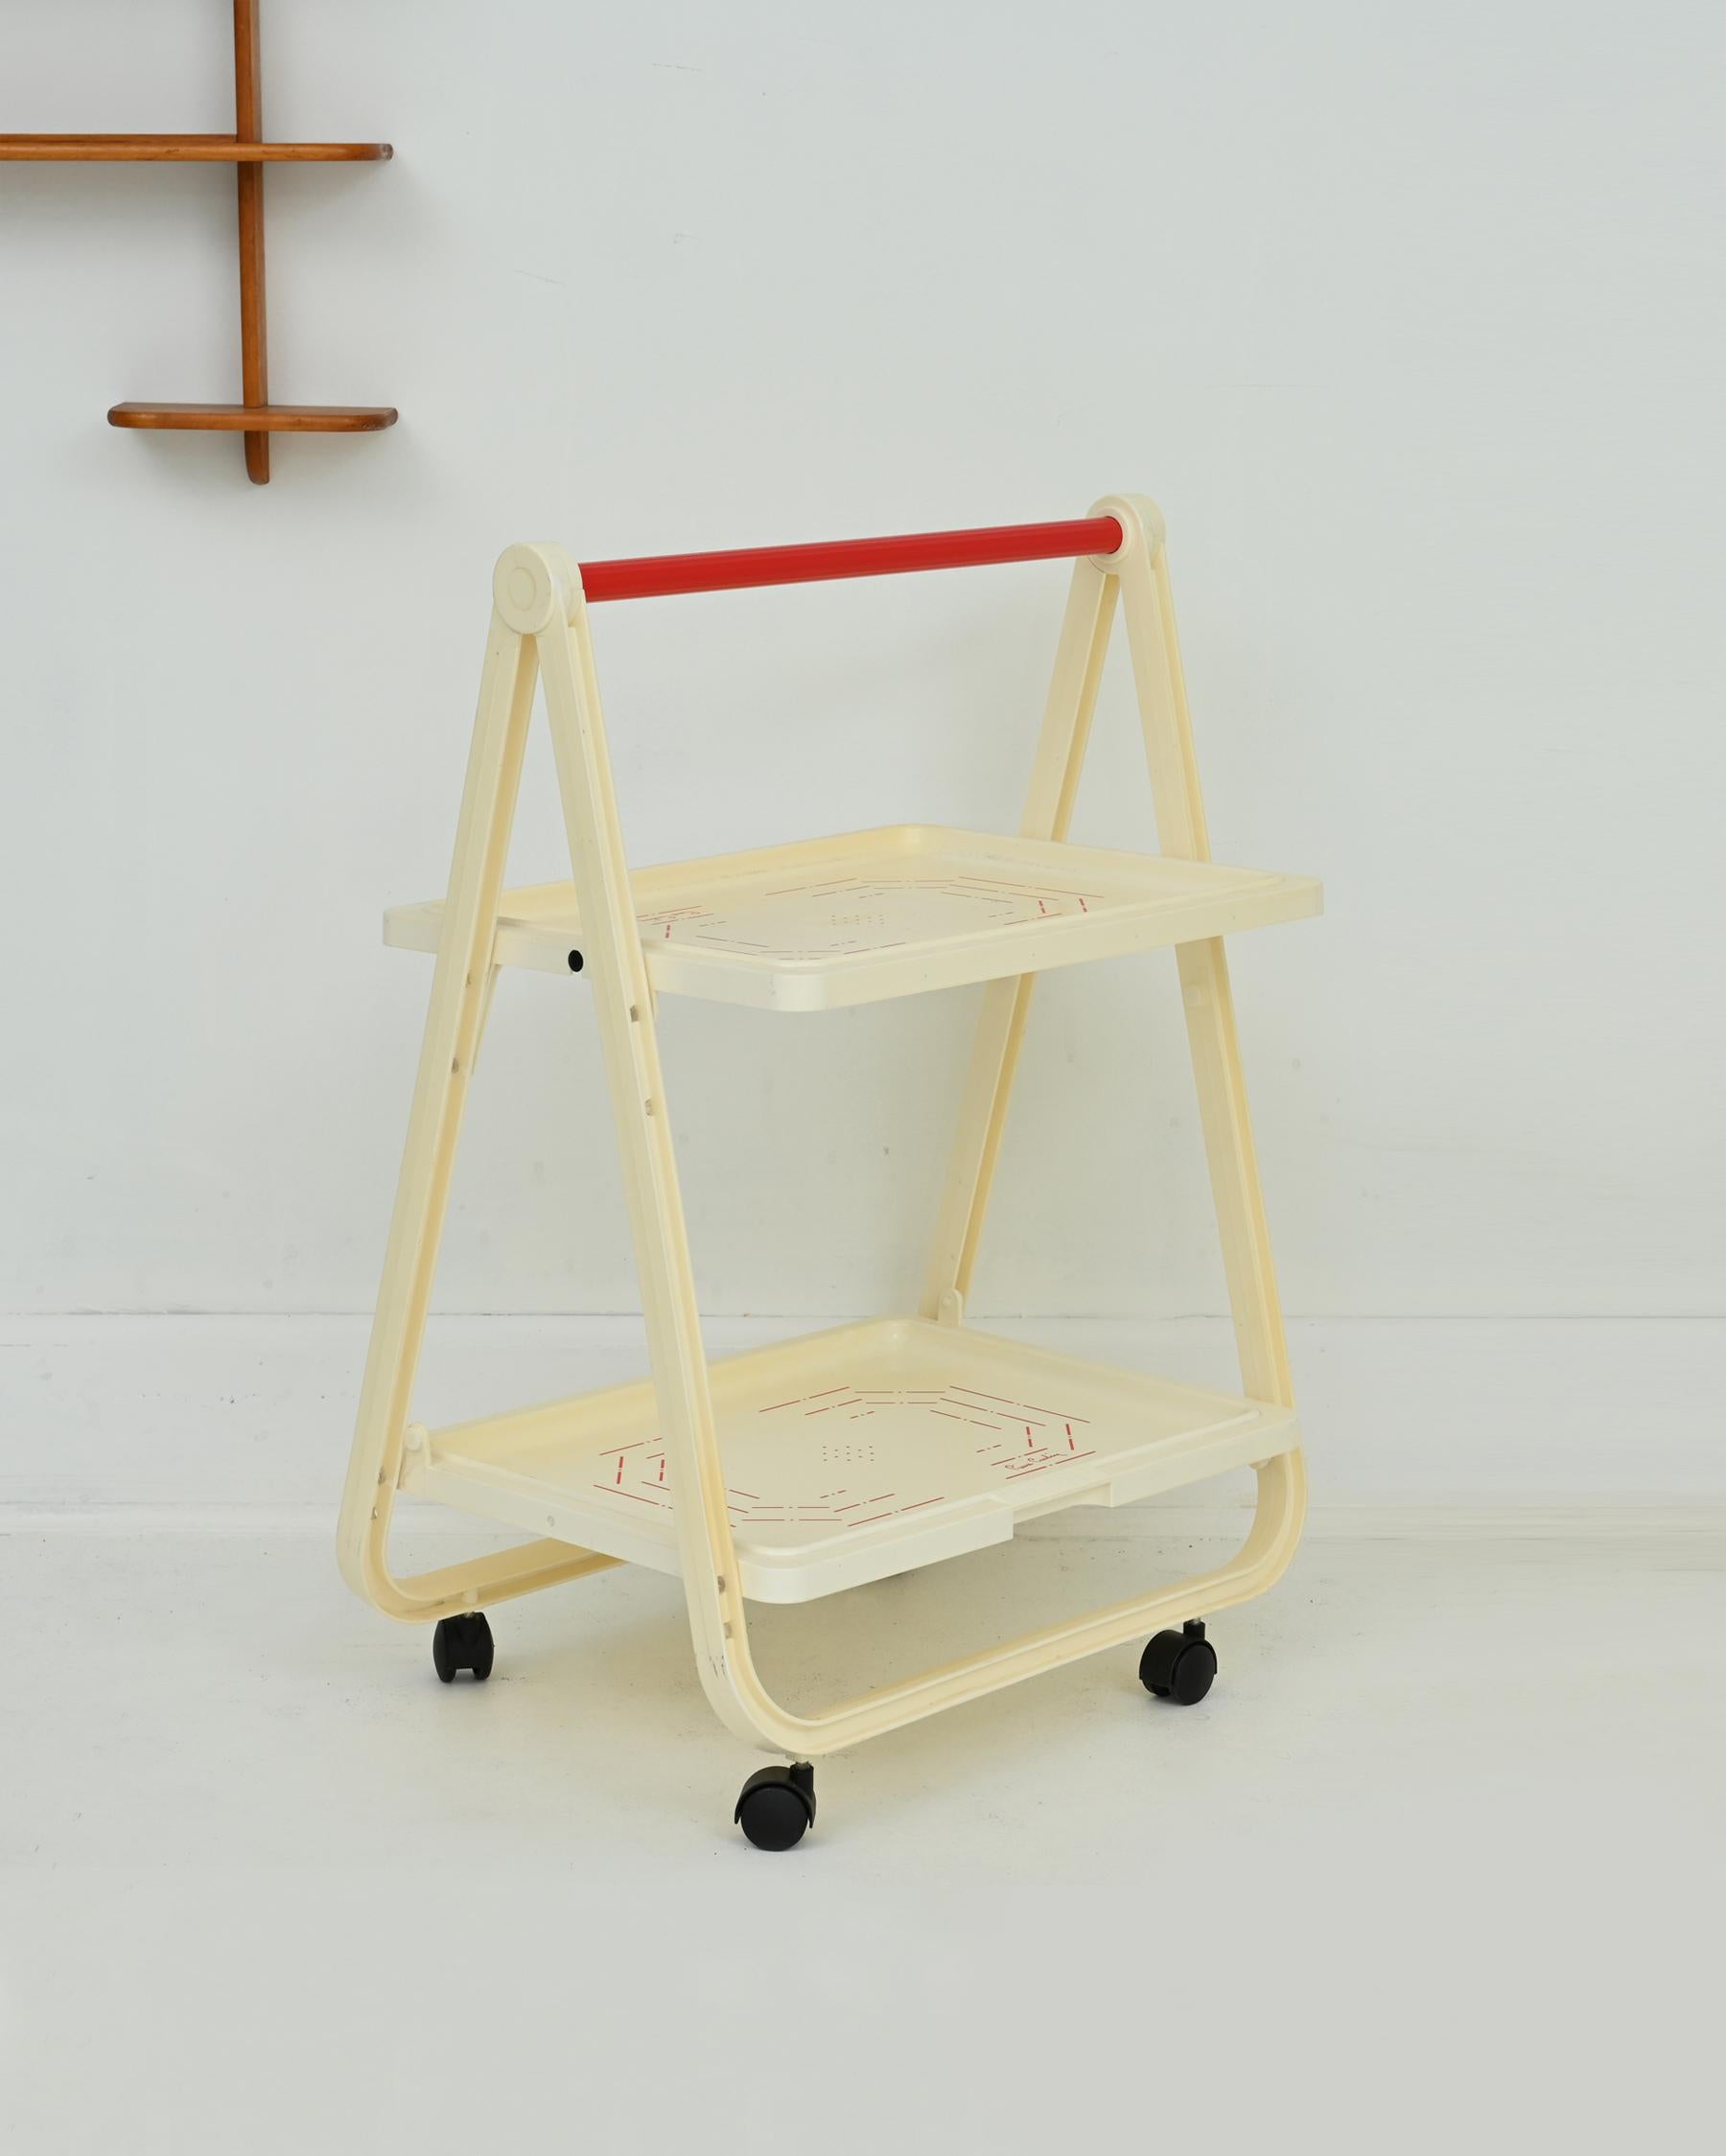 1970s exceedingly rare bar cart designed by Pierre Cardin for Simo. Pierre Cardin maker’s mark throughout. It is versatile and lightweight, yet has a strong plastic construction. Some discoloration spots due to age as shown in photos. Rolls easily